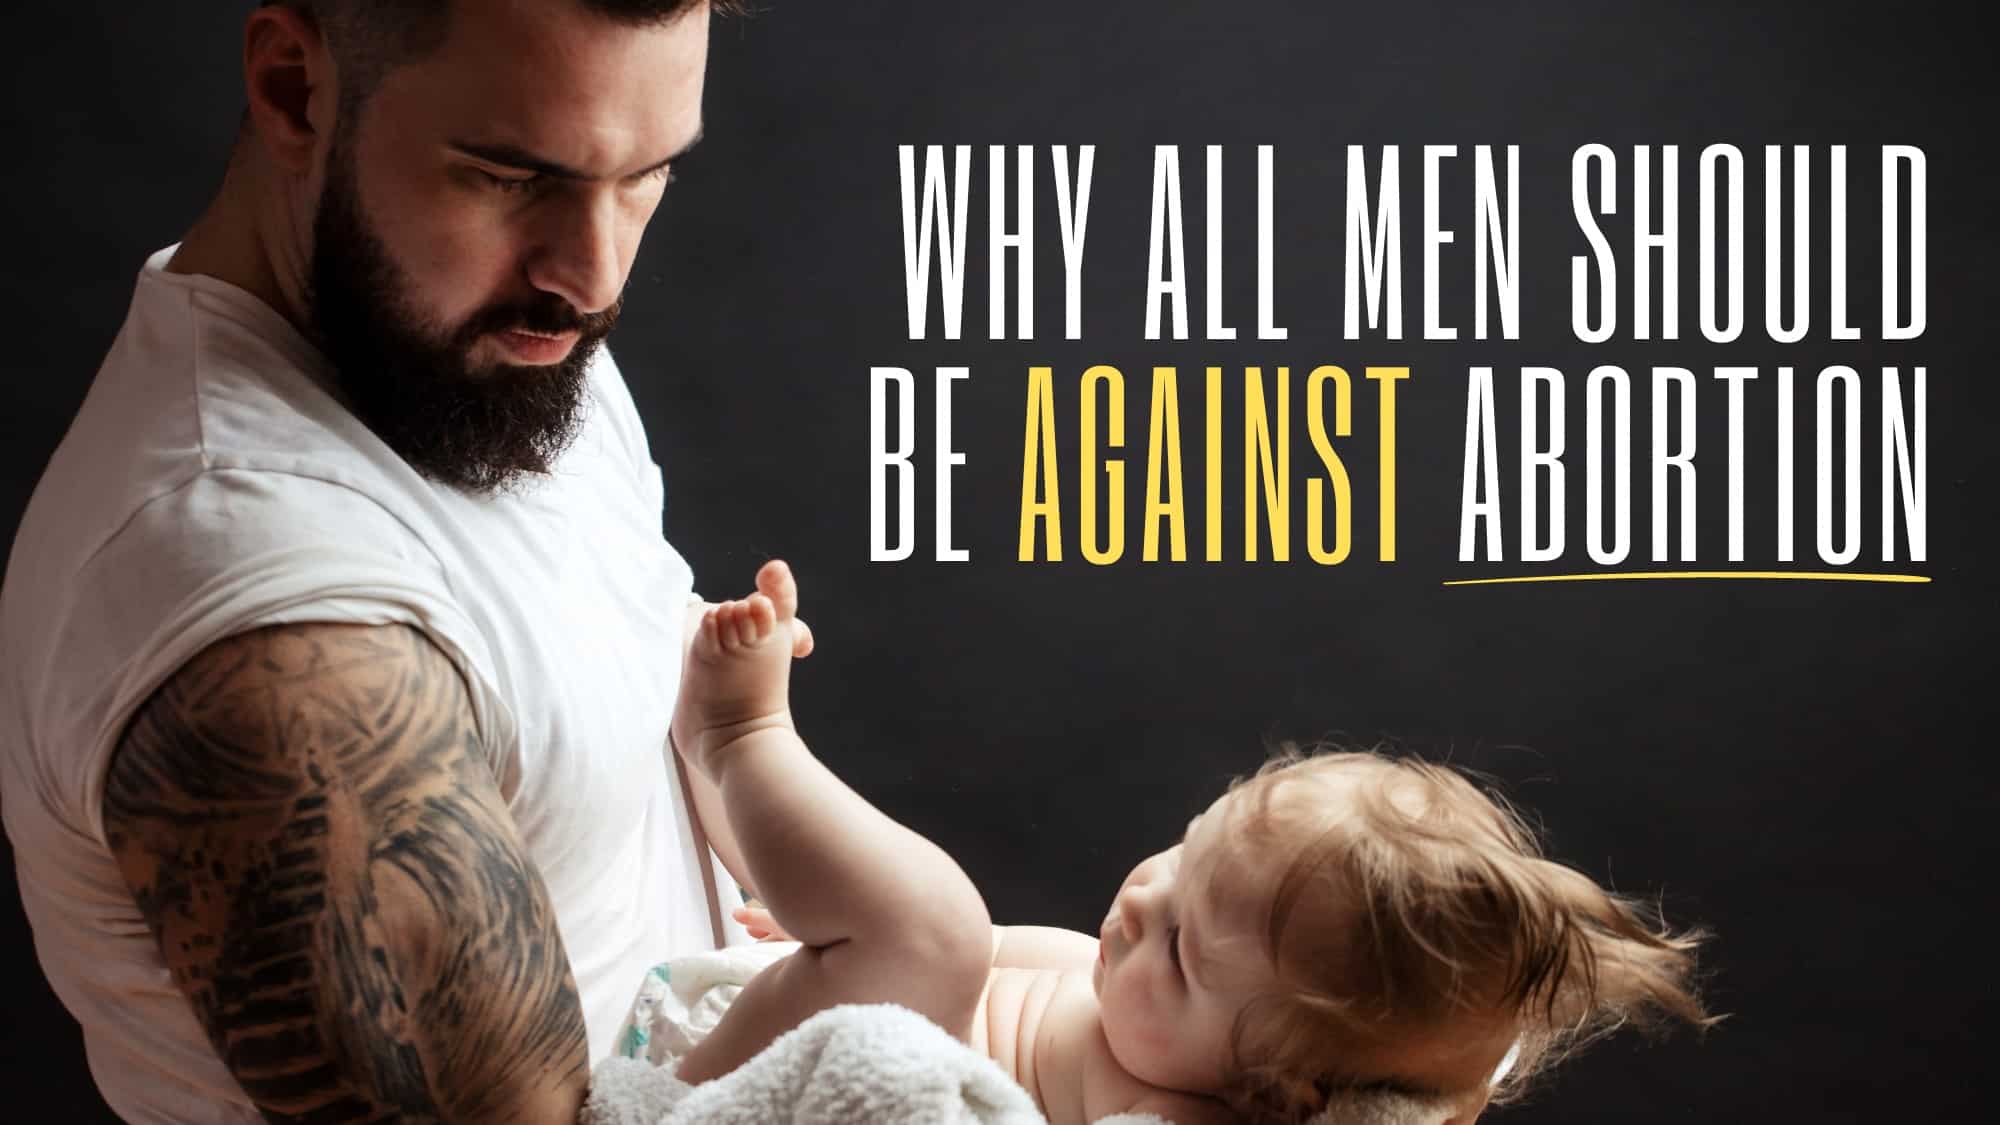 Image of a man holding a baby and why all men should be against abortion